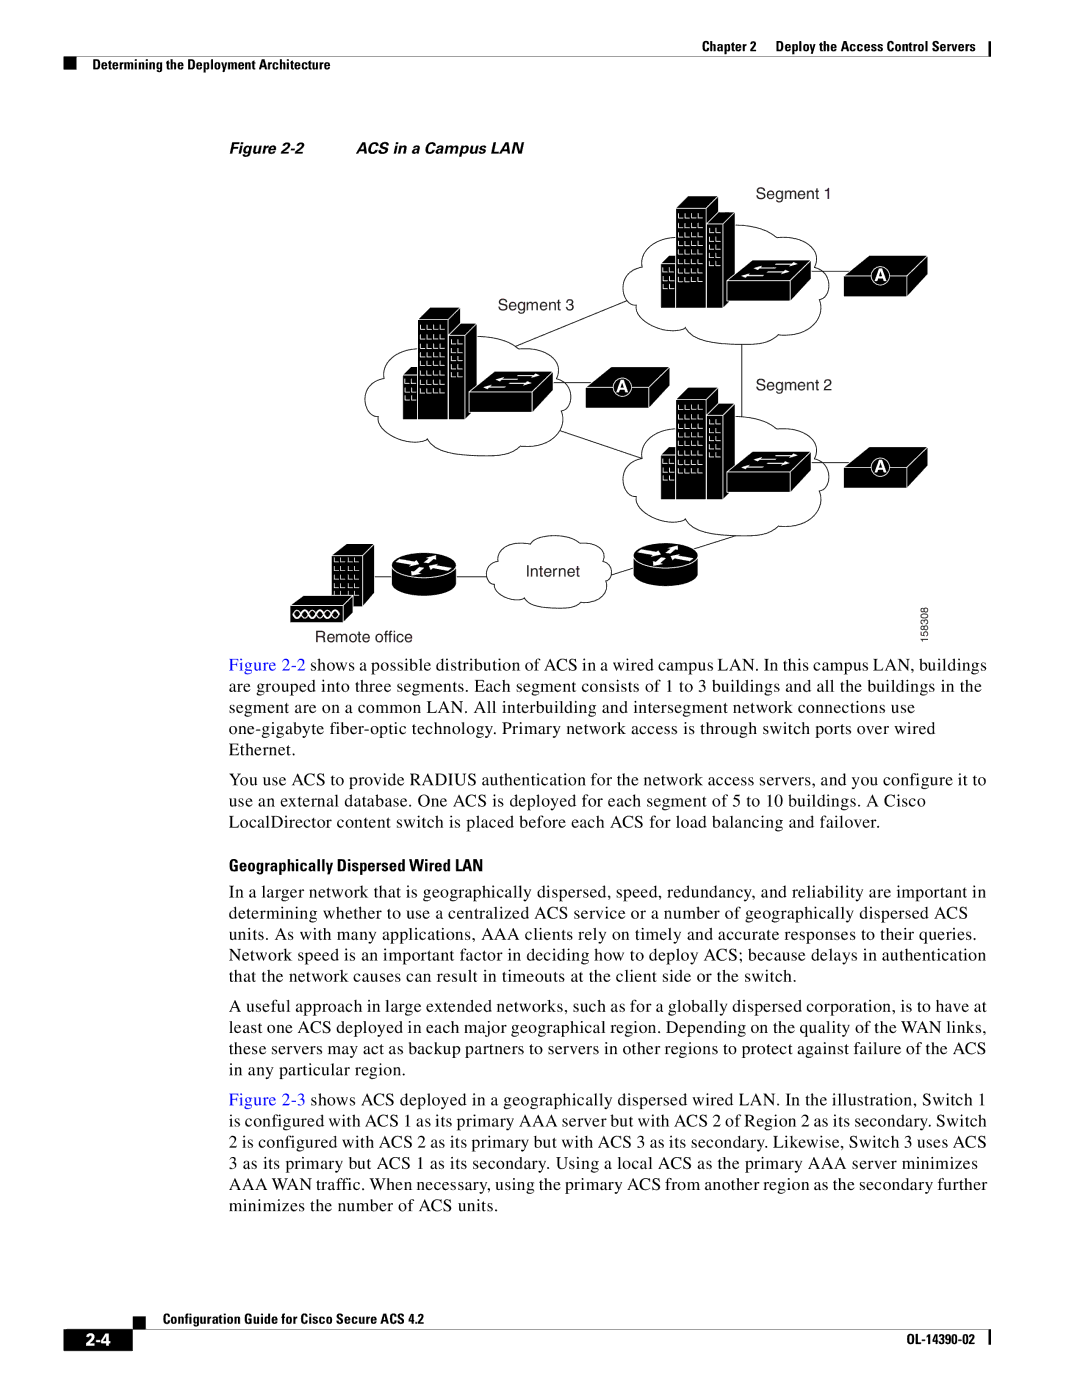 Cisco Systems 4.2 manual Geographically Dispersed Wired LAN, ACS in a Campus LAN 